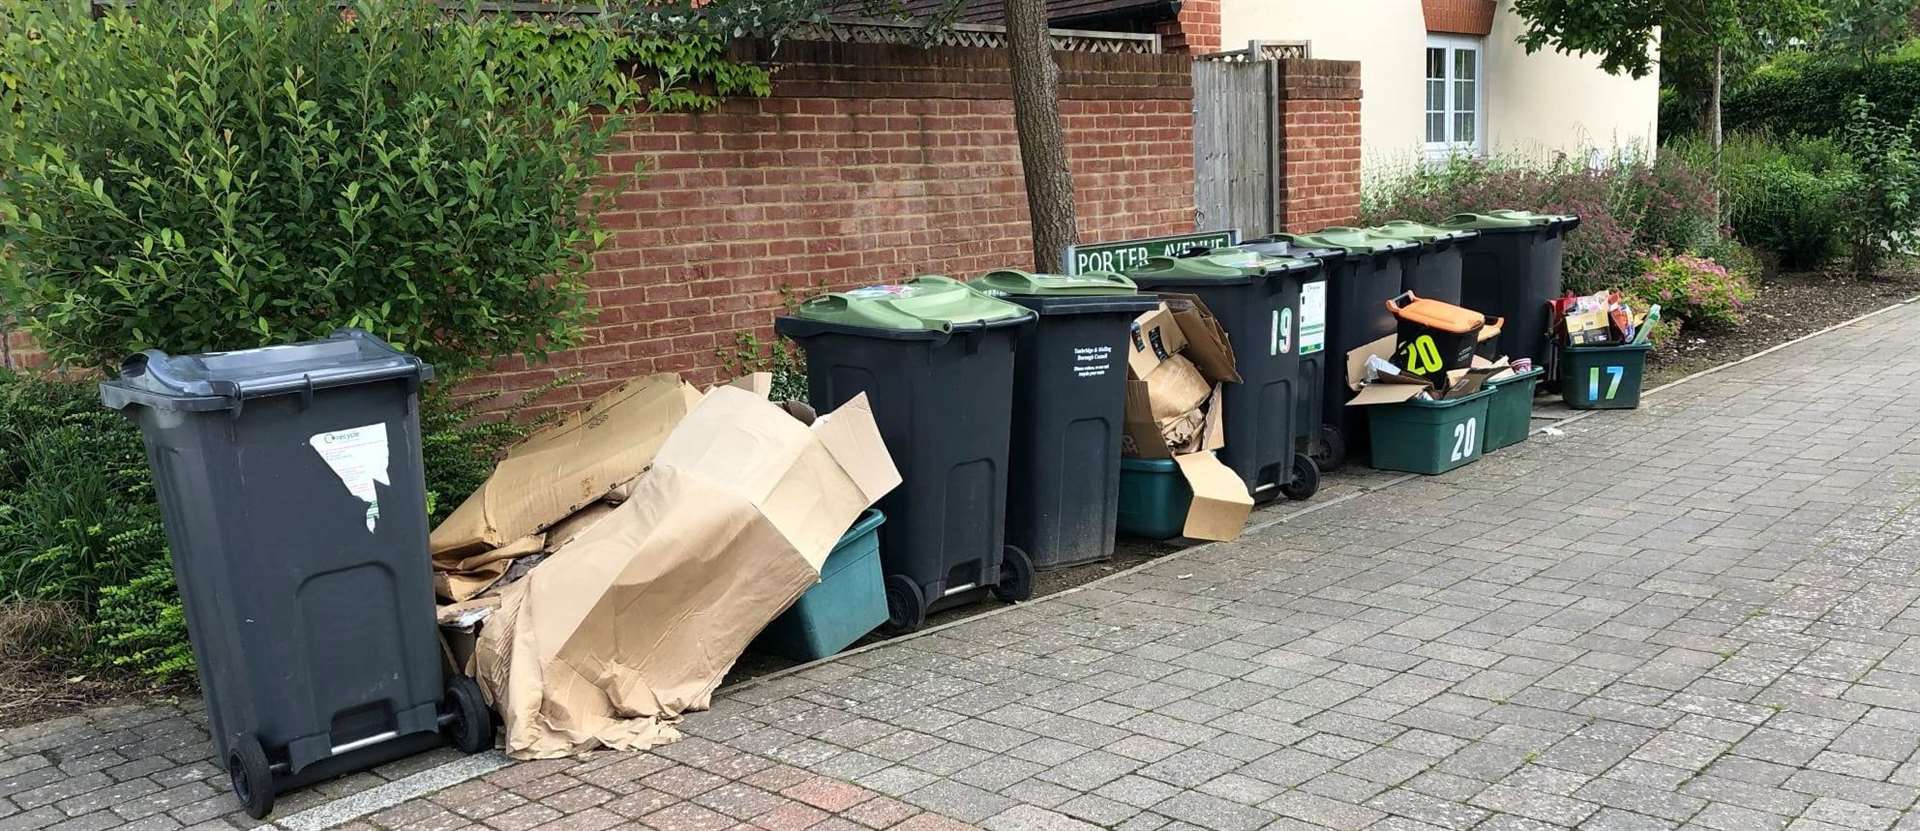 The recycling bins in Porter Avenue are overflowing